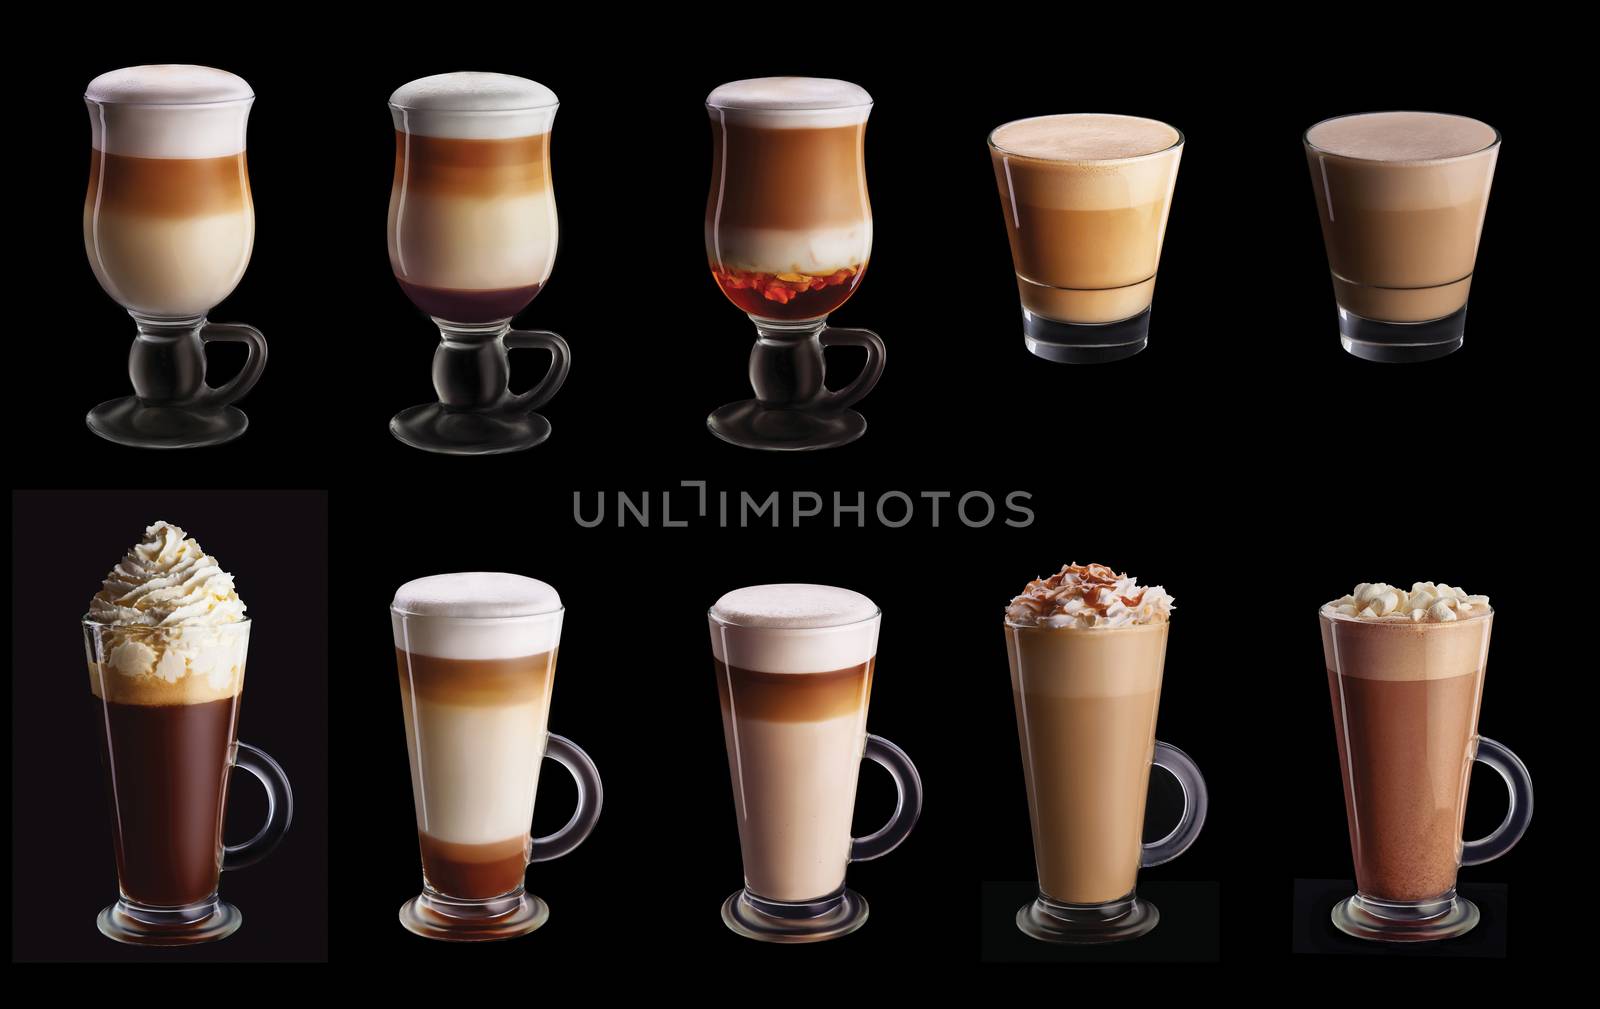 Ten coffee coctails collage set by shivanetua